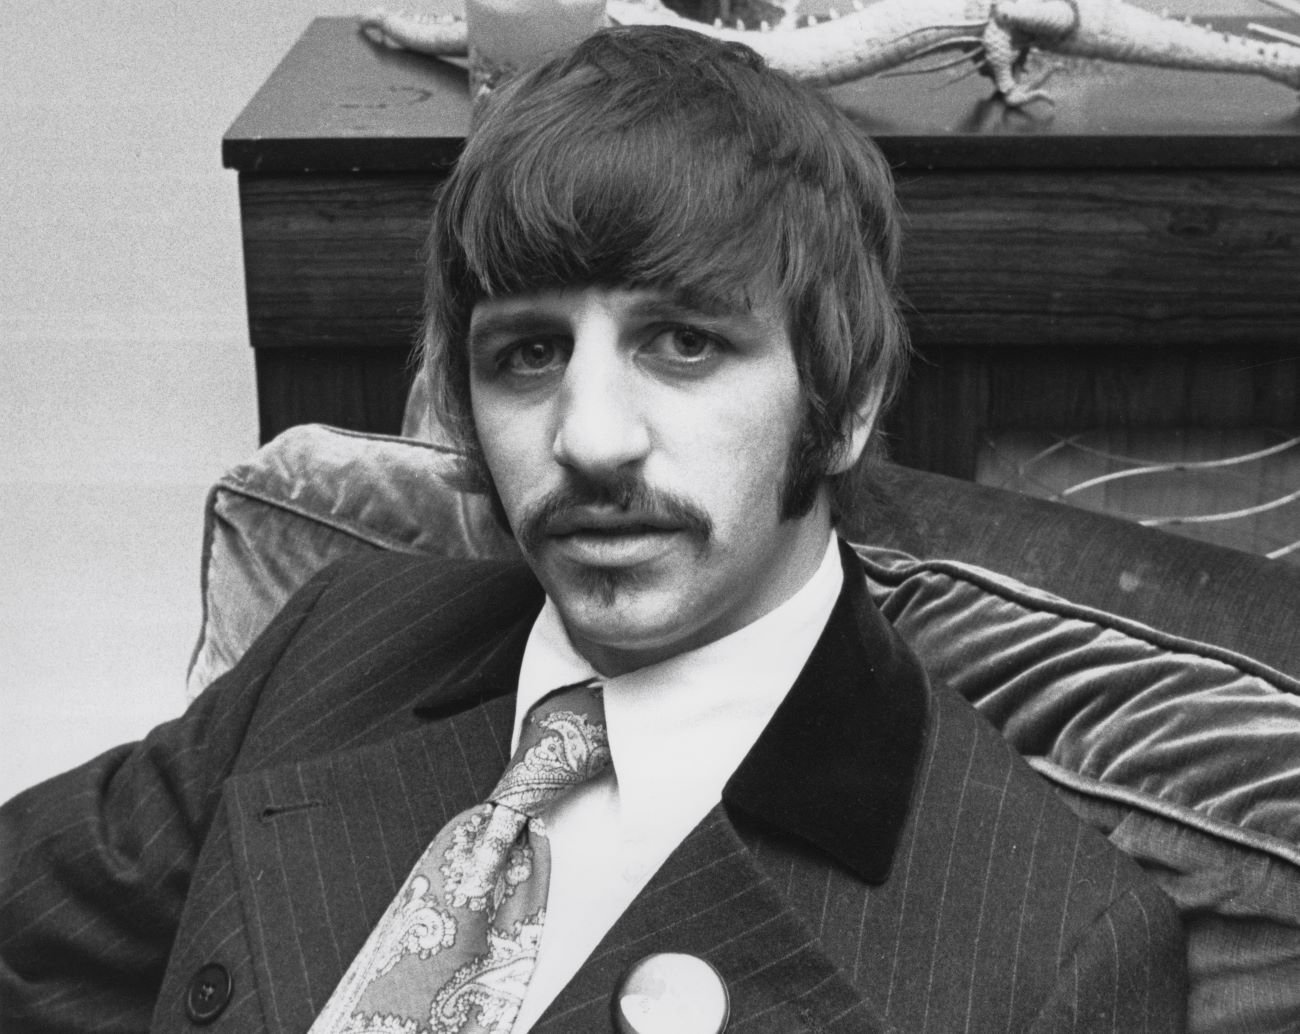 A black in white photo of Ringo Starr wearing a tie and sitting in an armchair.